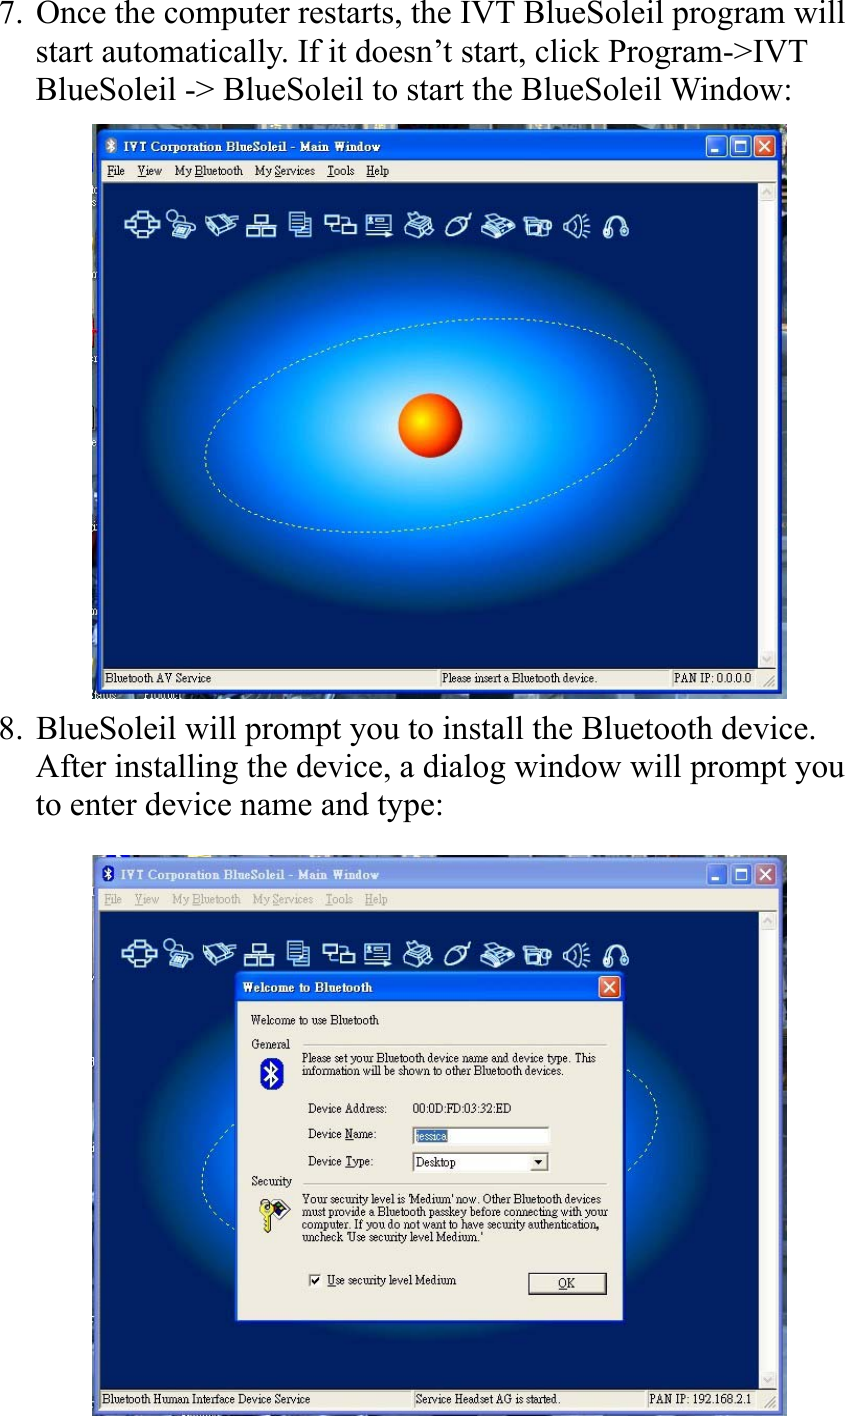 7. Once the computer restarts, the IVT BlueSoleil program will start automatically. If it doesn’t start, click Program-&gt;IVT BlueSoleil -&gt; BlueSoleil to start the BlueSoleil Window:         8. BlueSoleil will prompt you to install the Bluetooth device.   After installing the device, a dialog window will prompt you to enter device name and type:         